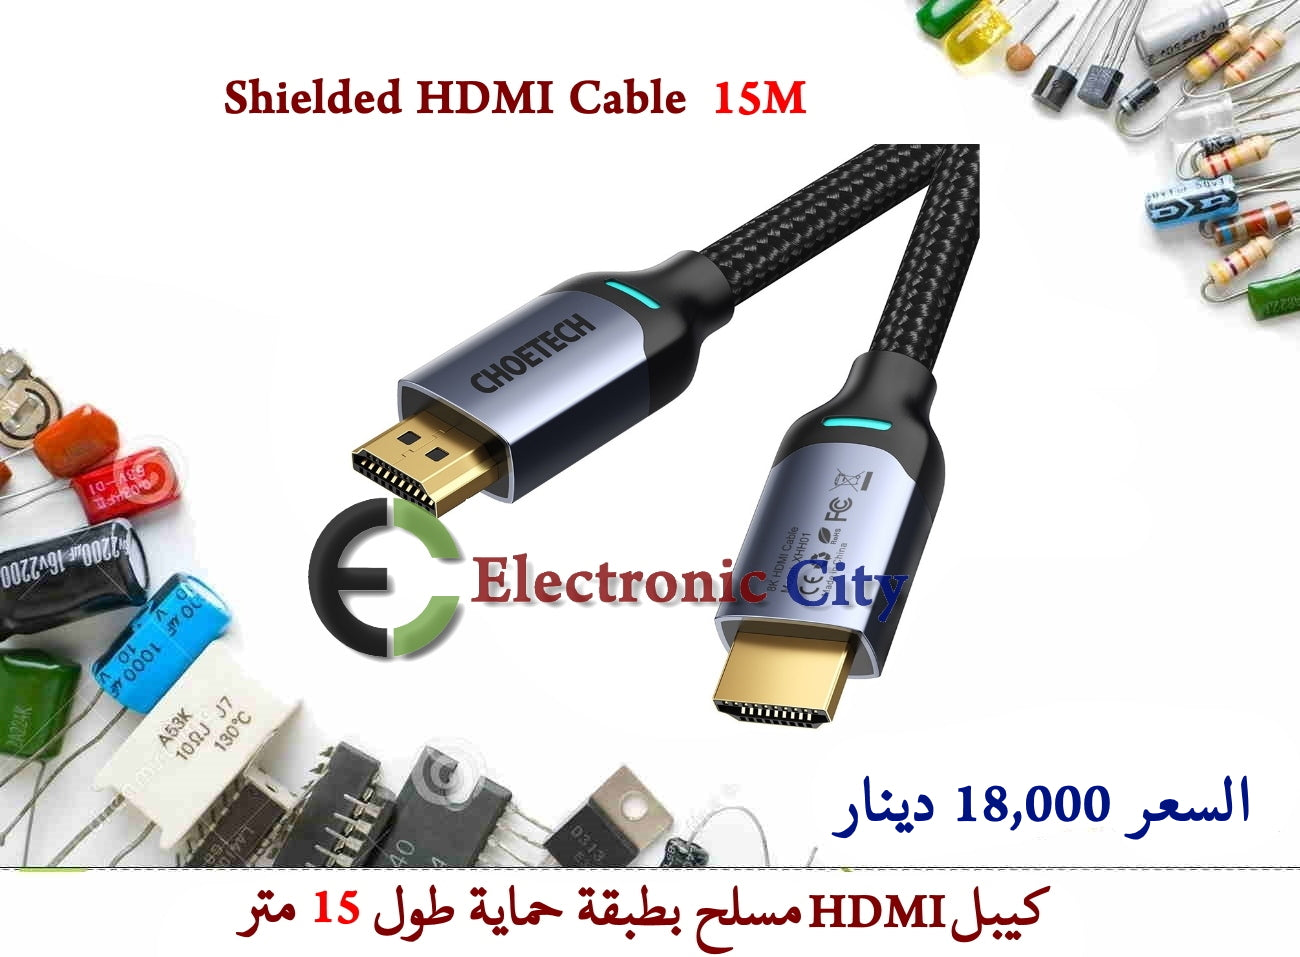 Shielded HDMI Cable 15M